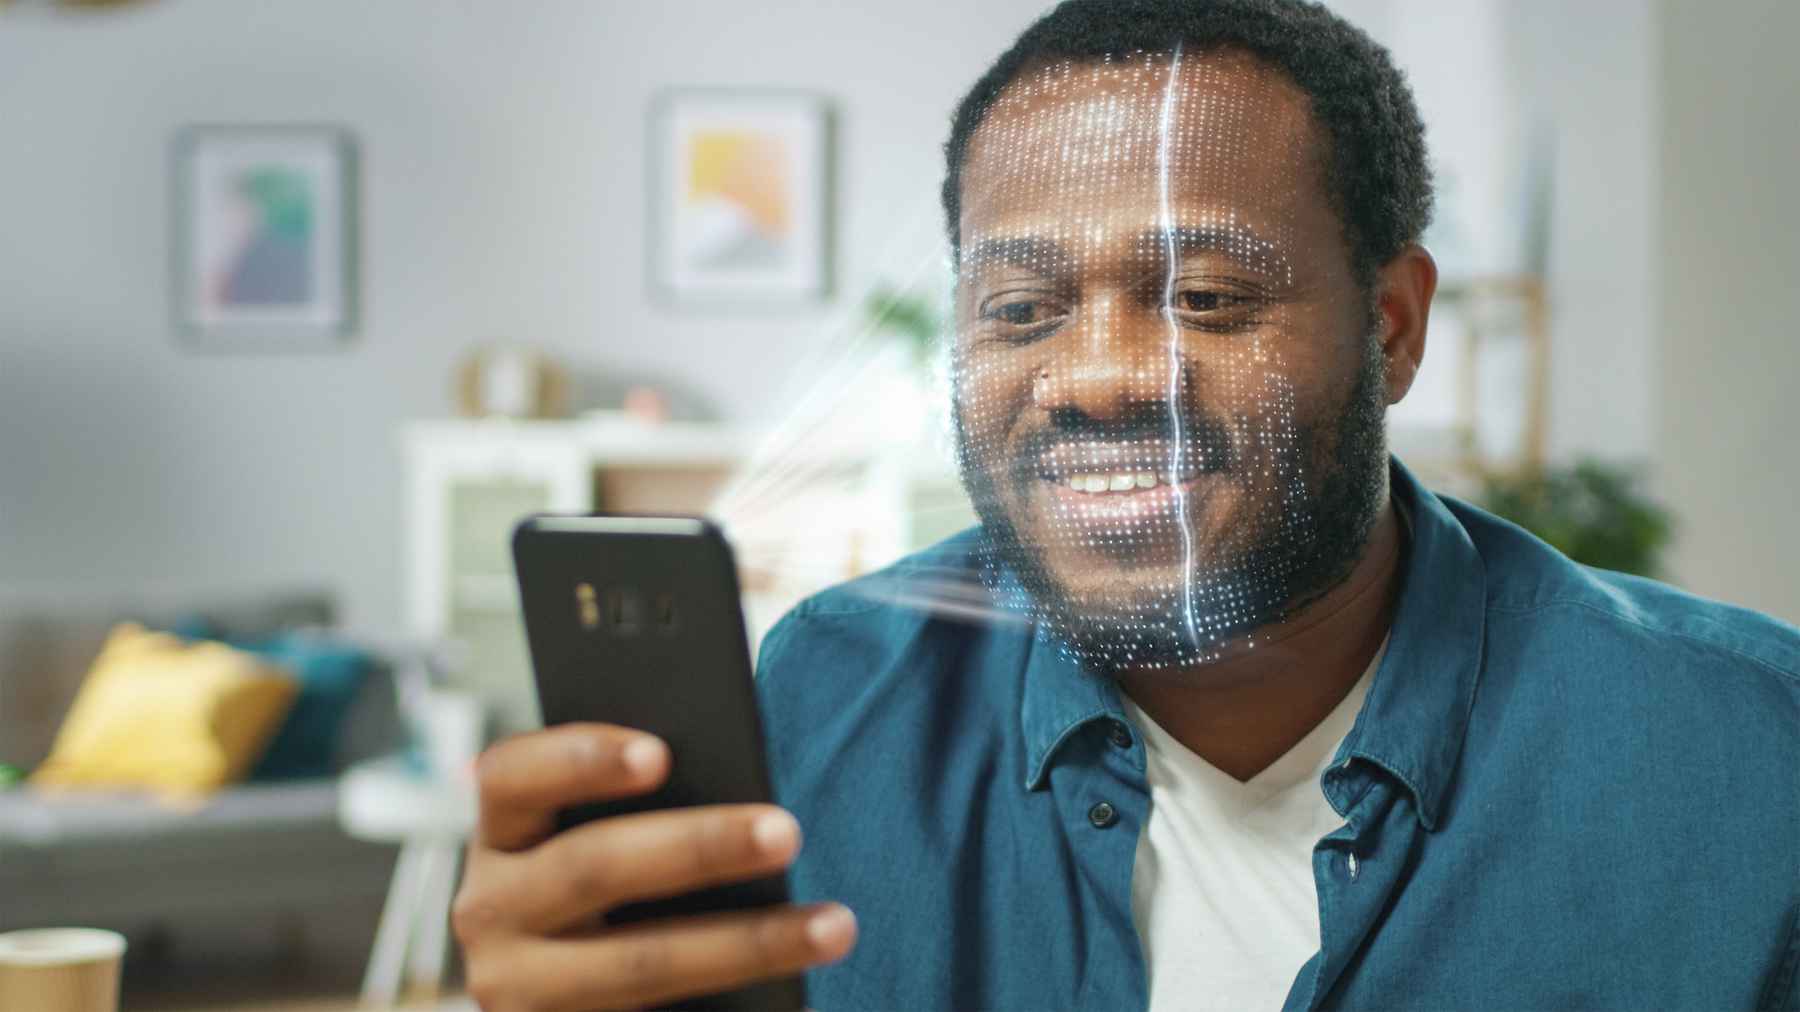 Smiling Black man holding smartphone while his face is scanned for digital ID.